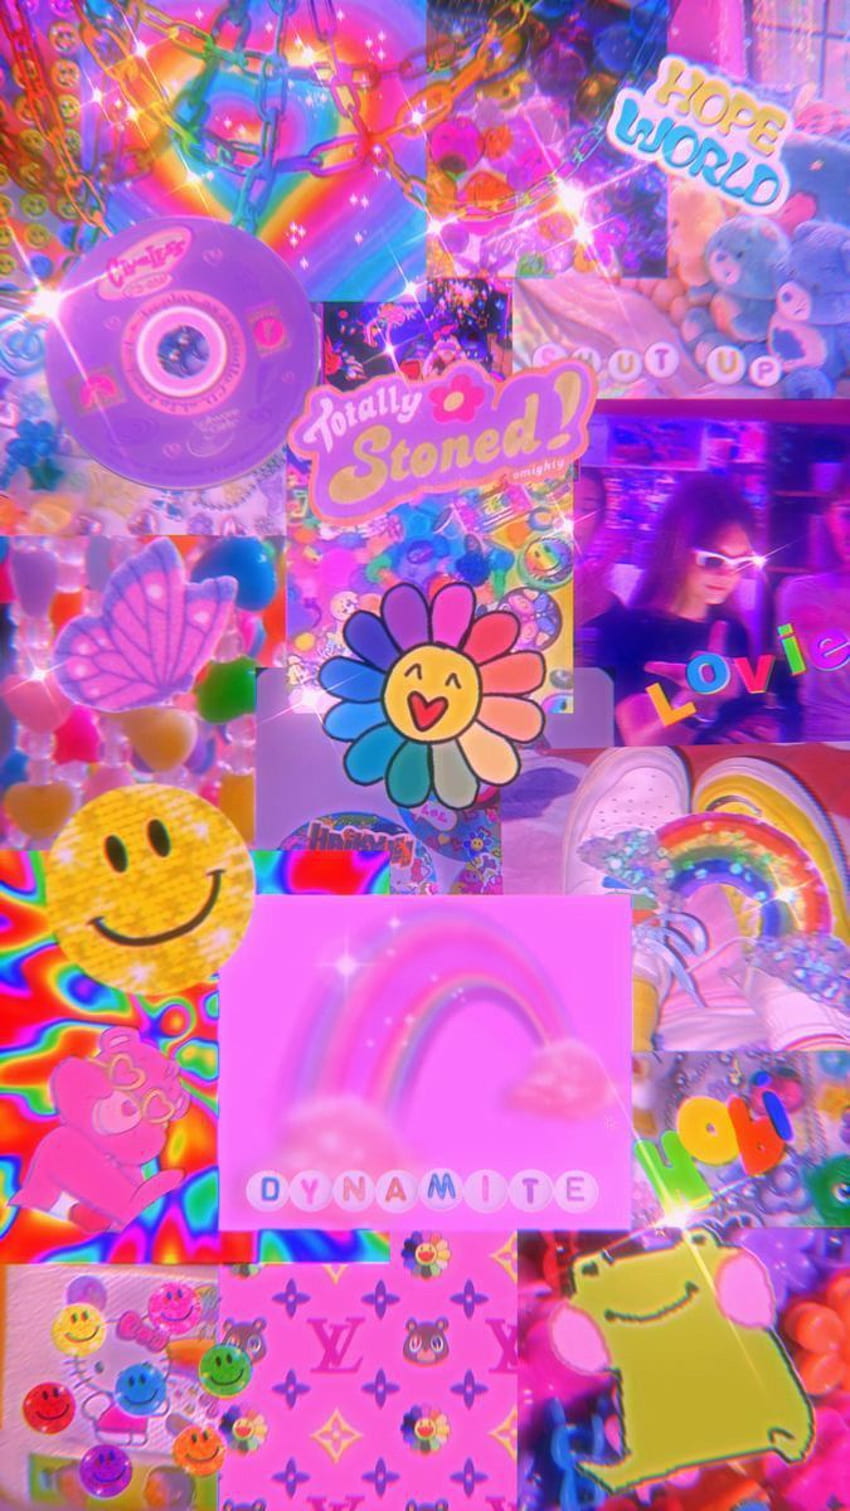 Aesthetic background with emojis, stickers, and a rainbow - Indie, kidcore, webcore